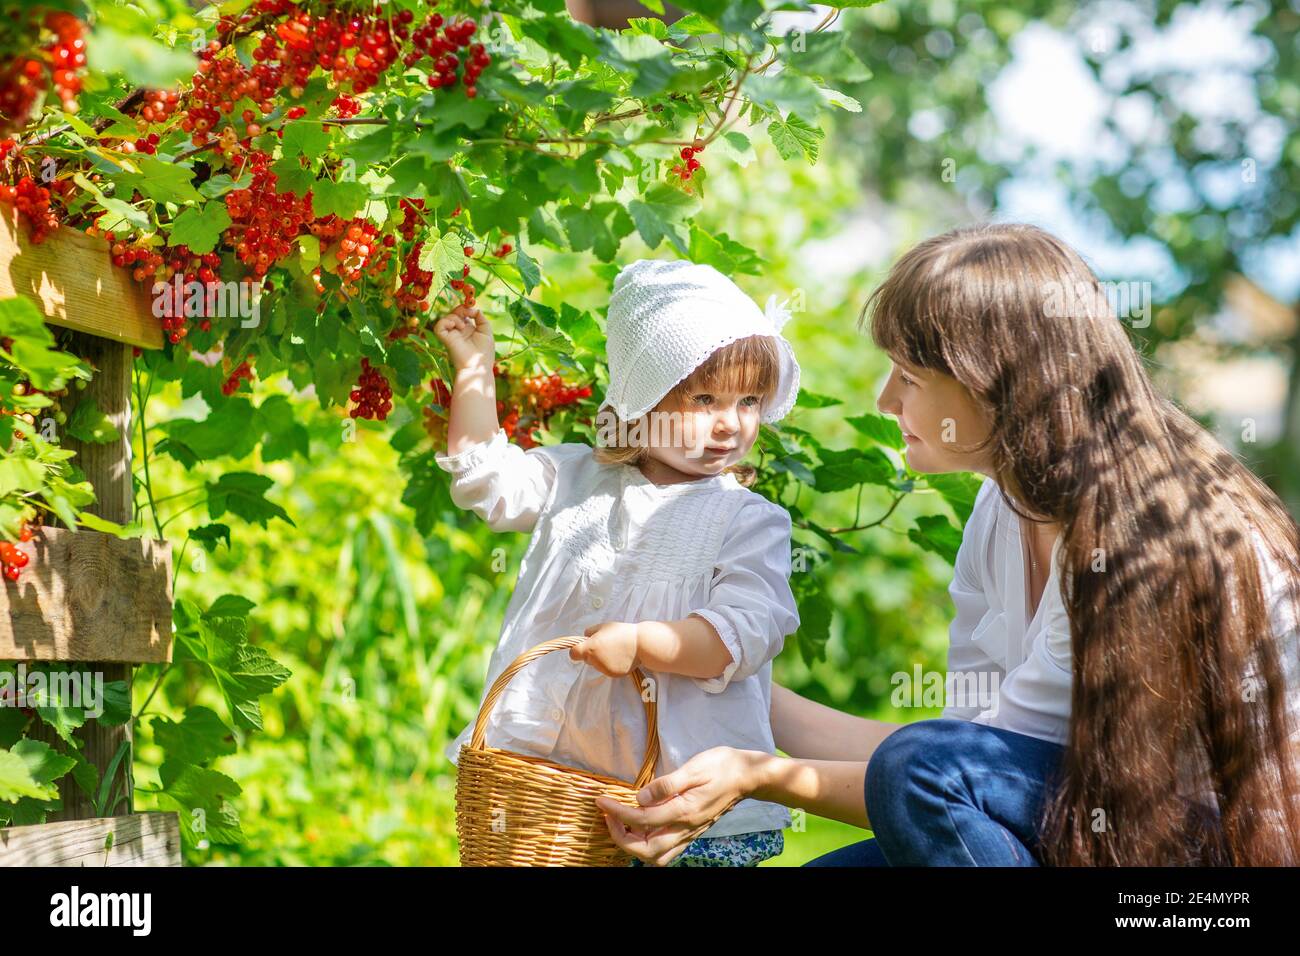 a girl in a white blouse with a basket collects red currant berries from a  branch with her mother Stock Photo - Alamy